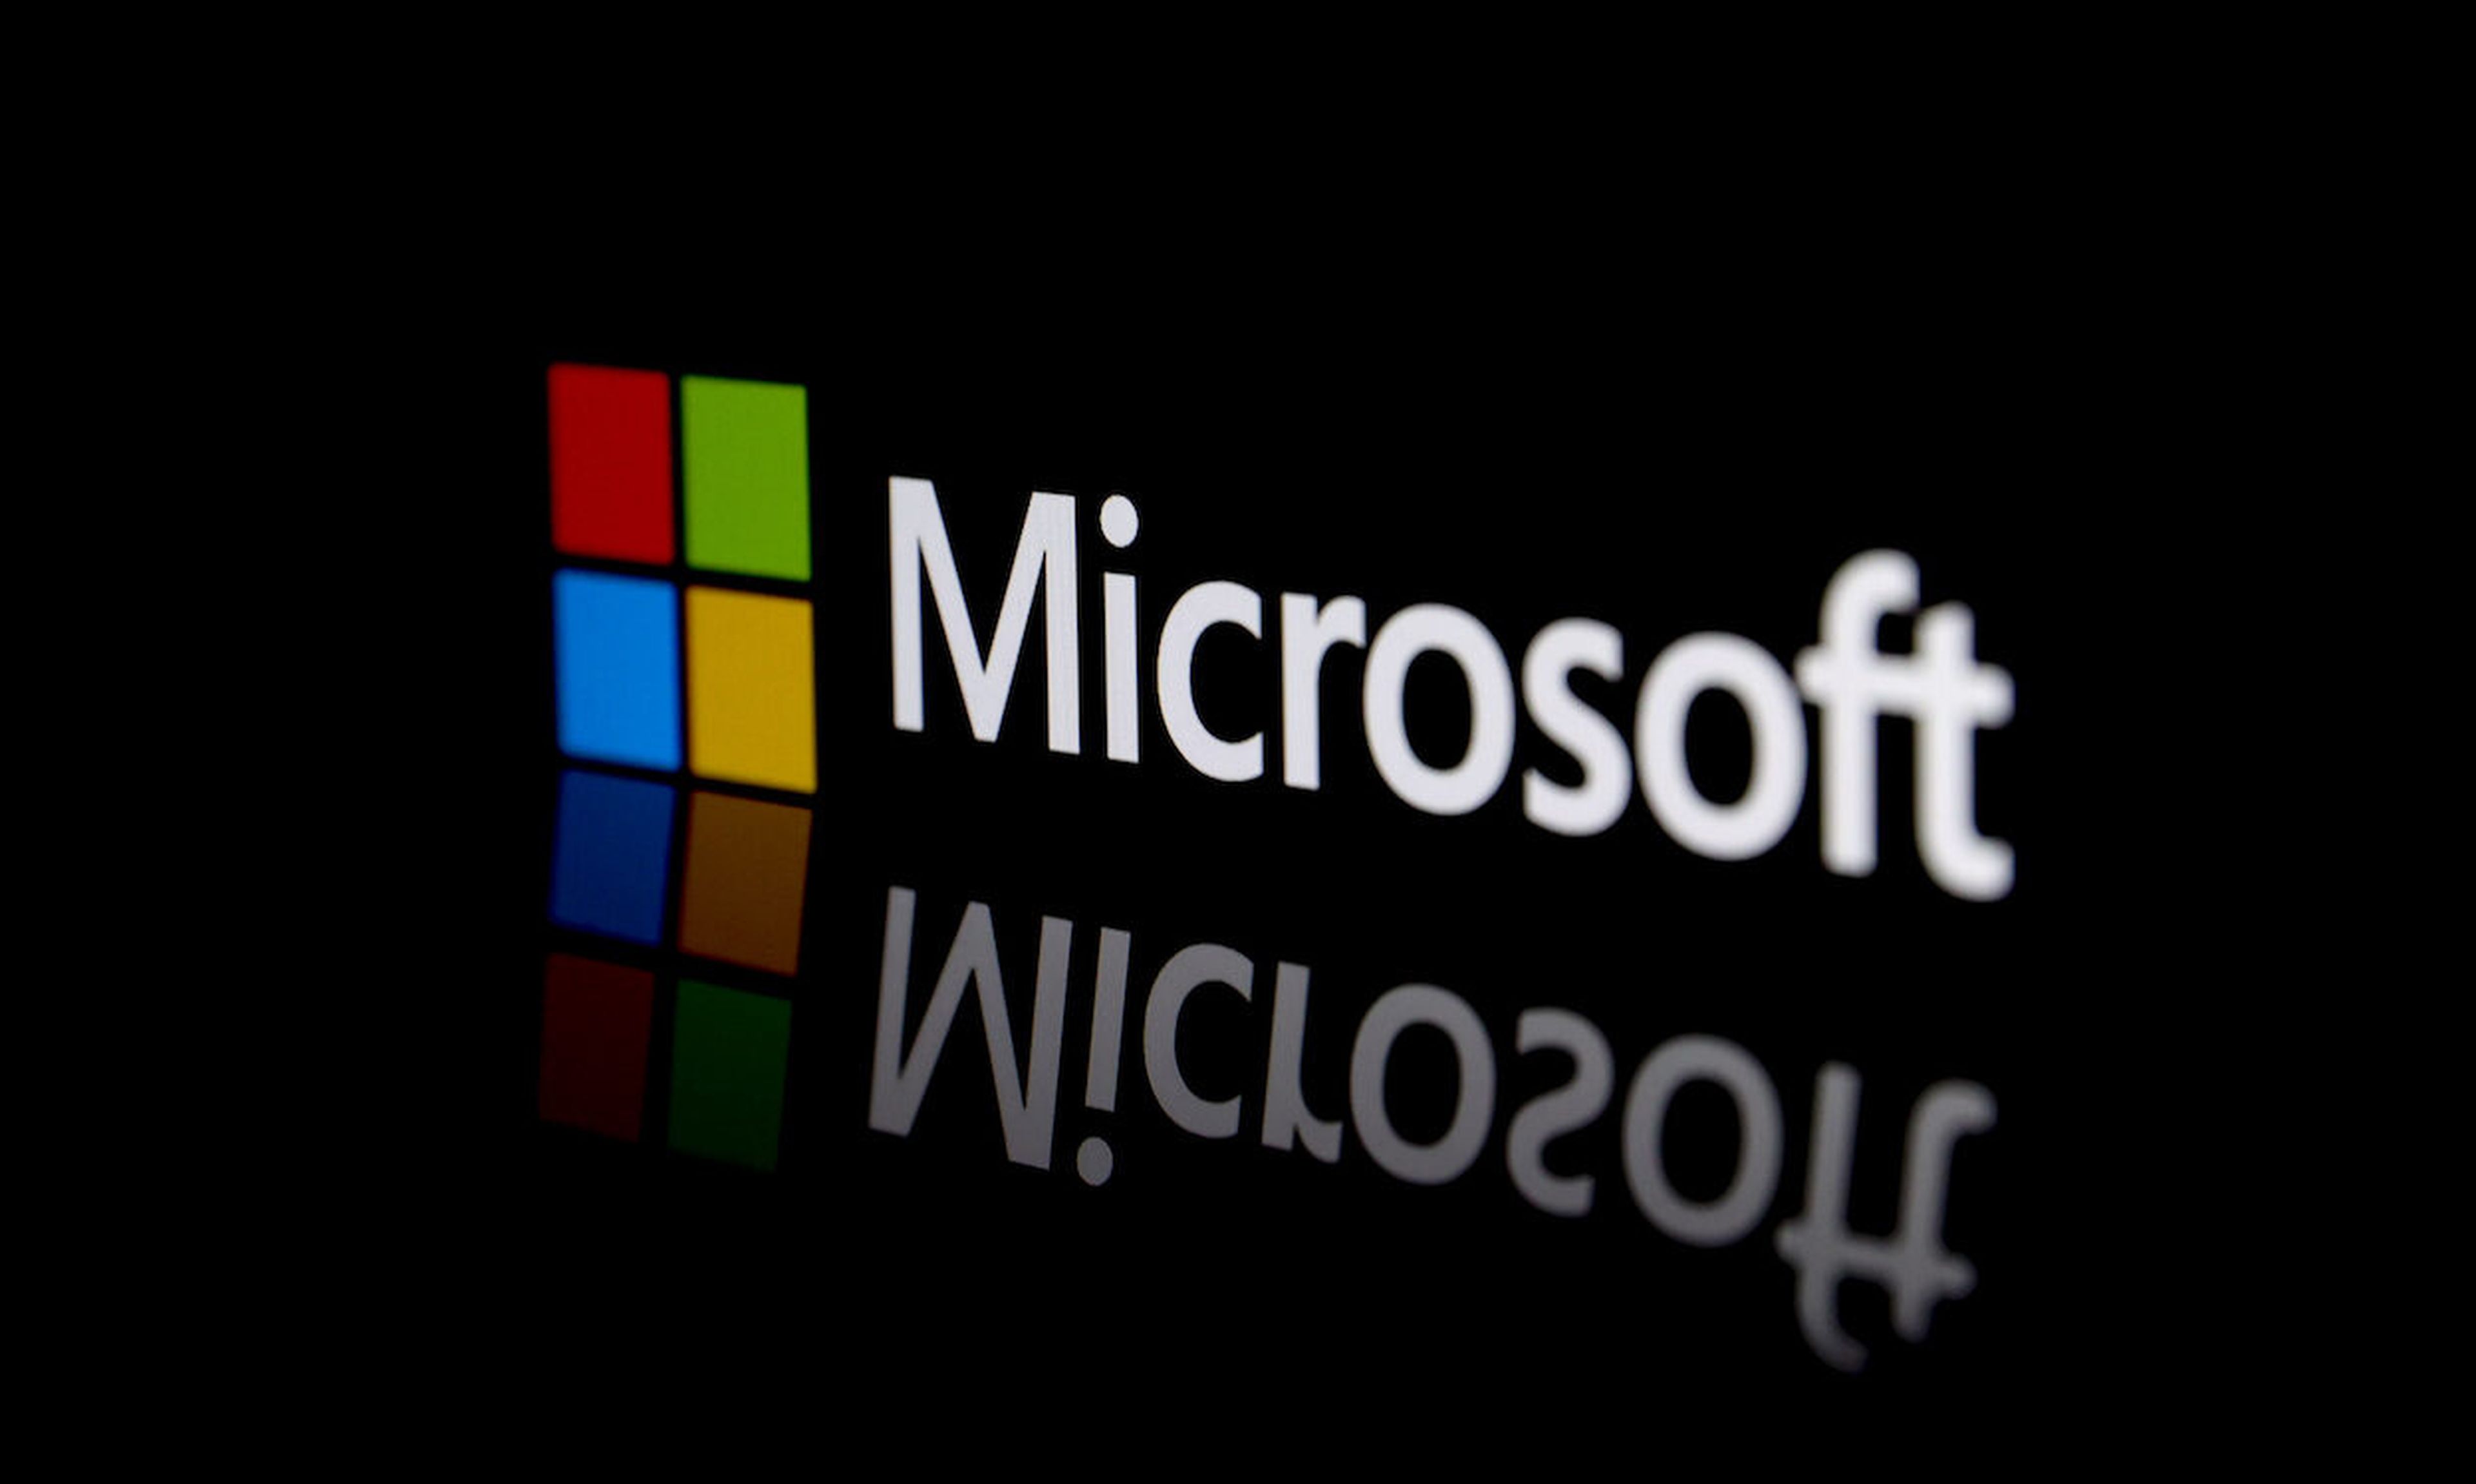 The type of key stolen by the hacking group is among the most powerful in modern IT and the flaws it exploits are not unique to Microsoft.  (Image Credit: Muhammed Selim Korkutata / Anadolu Agency)